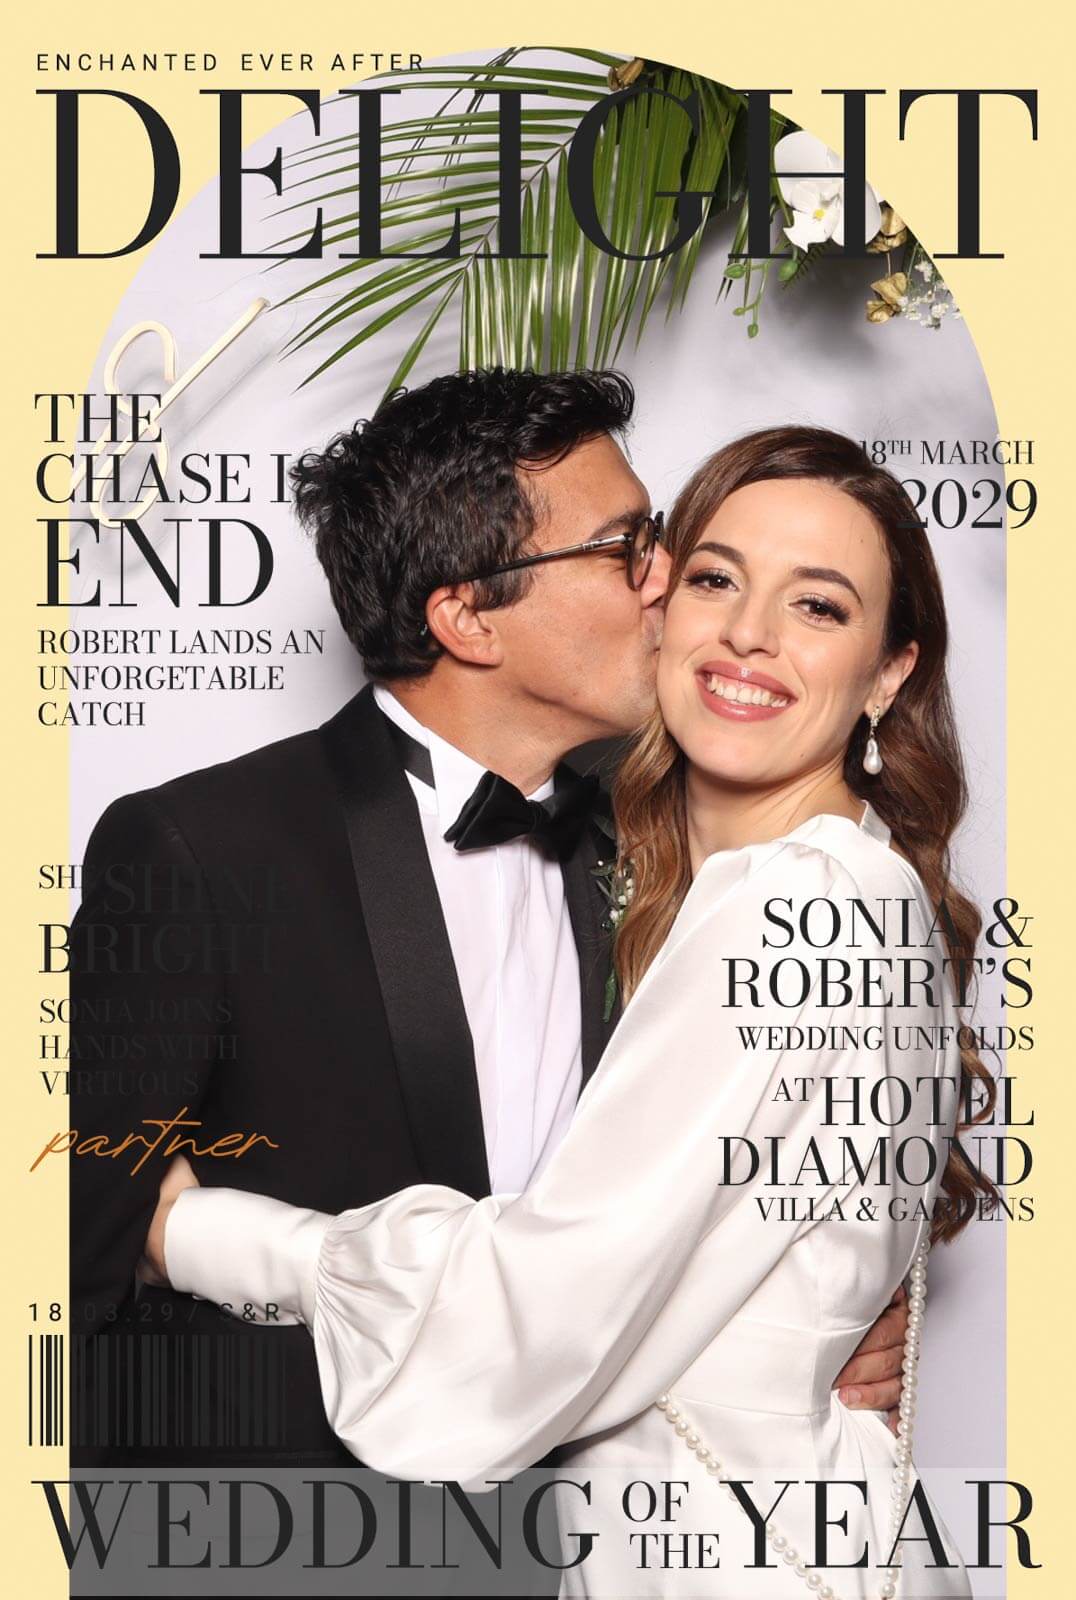 a cute couple kissing on the cover of a wedding magazine